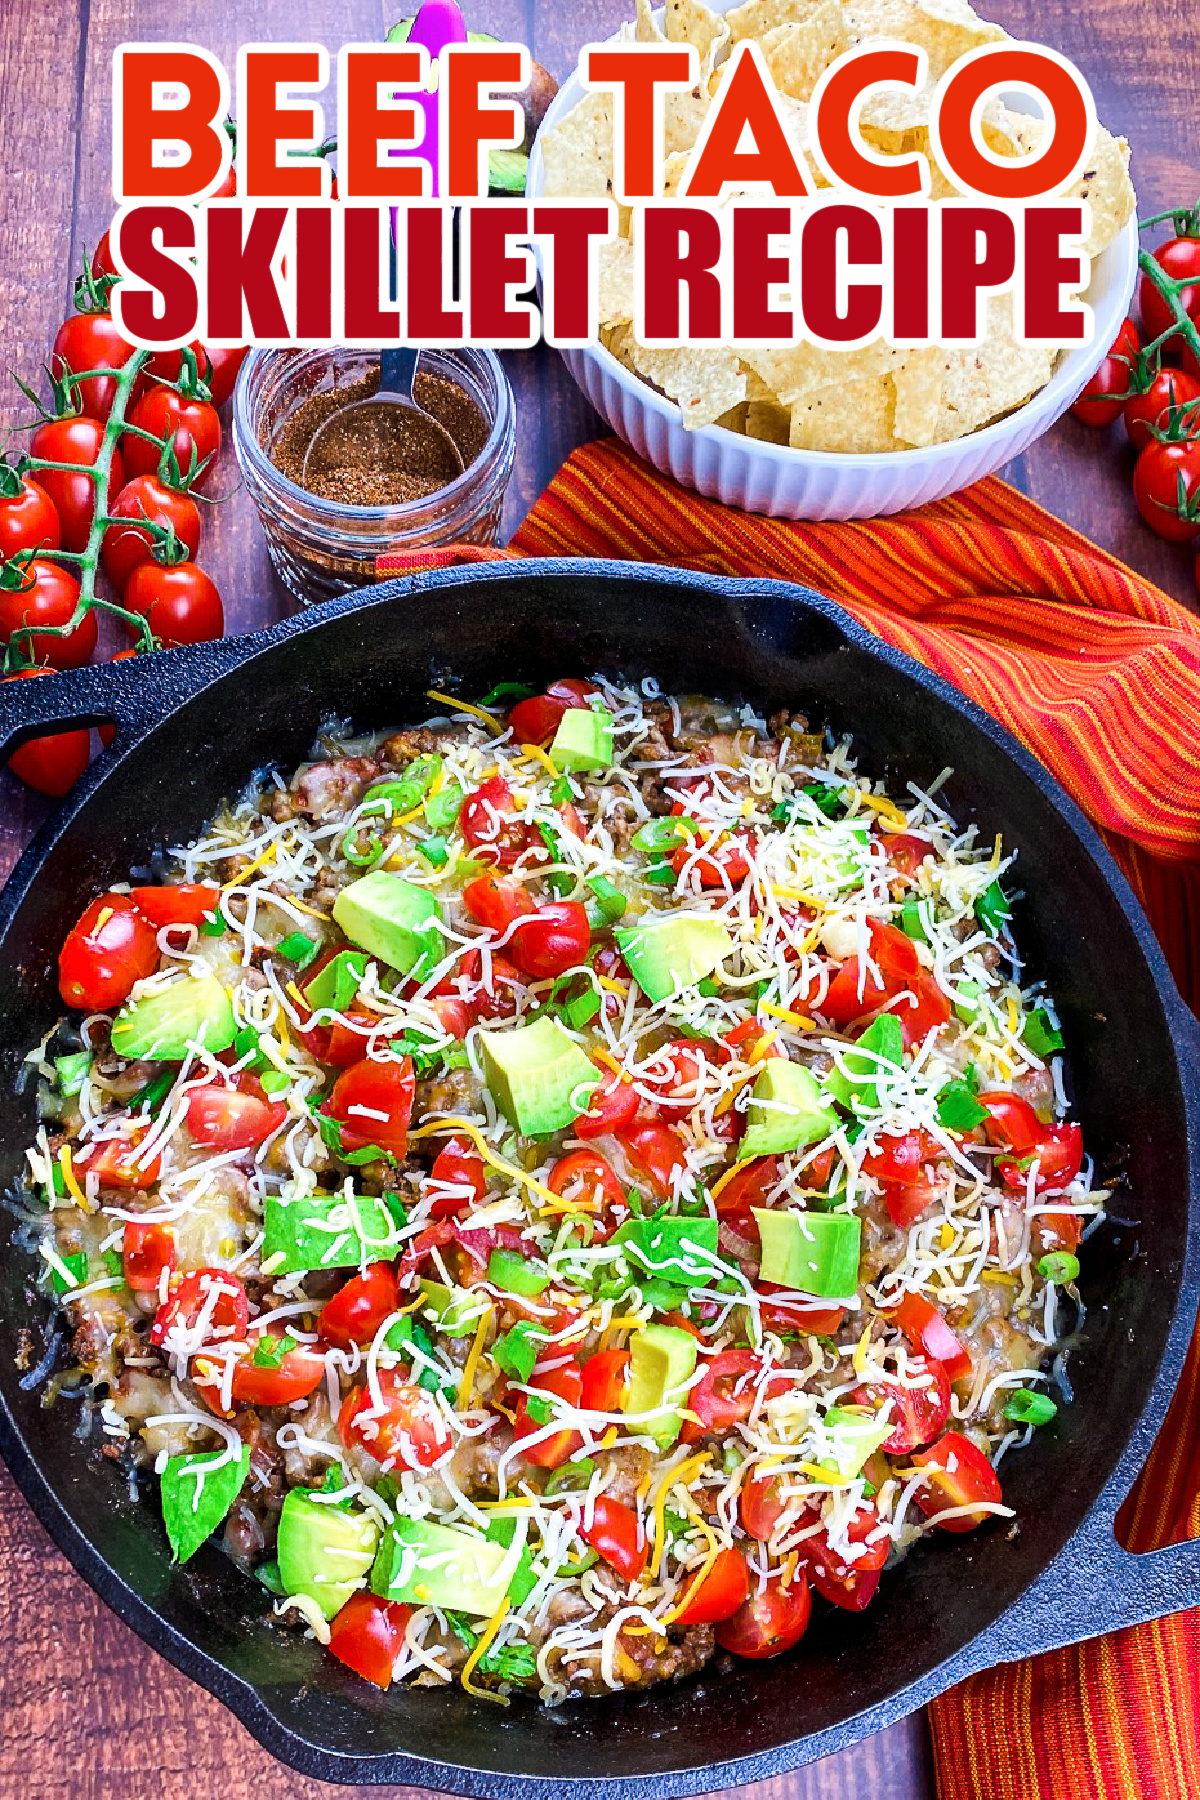 This recipe for an easy beef taco skillet makes a hearty family meal or serve with tortilla chips instead for an addictive appetizer!